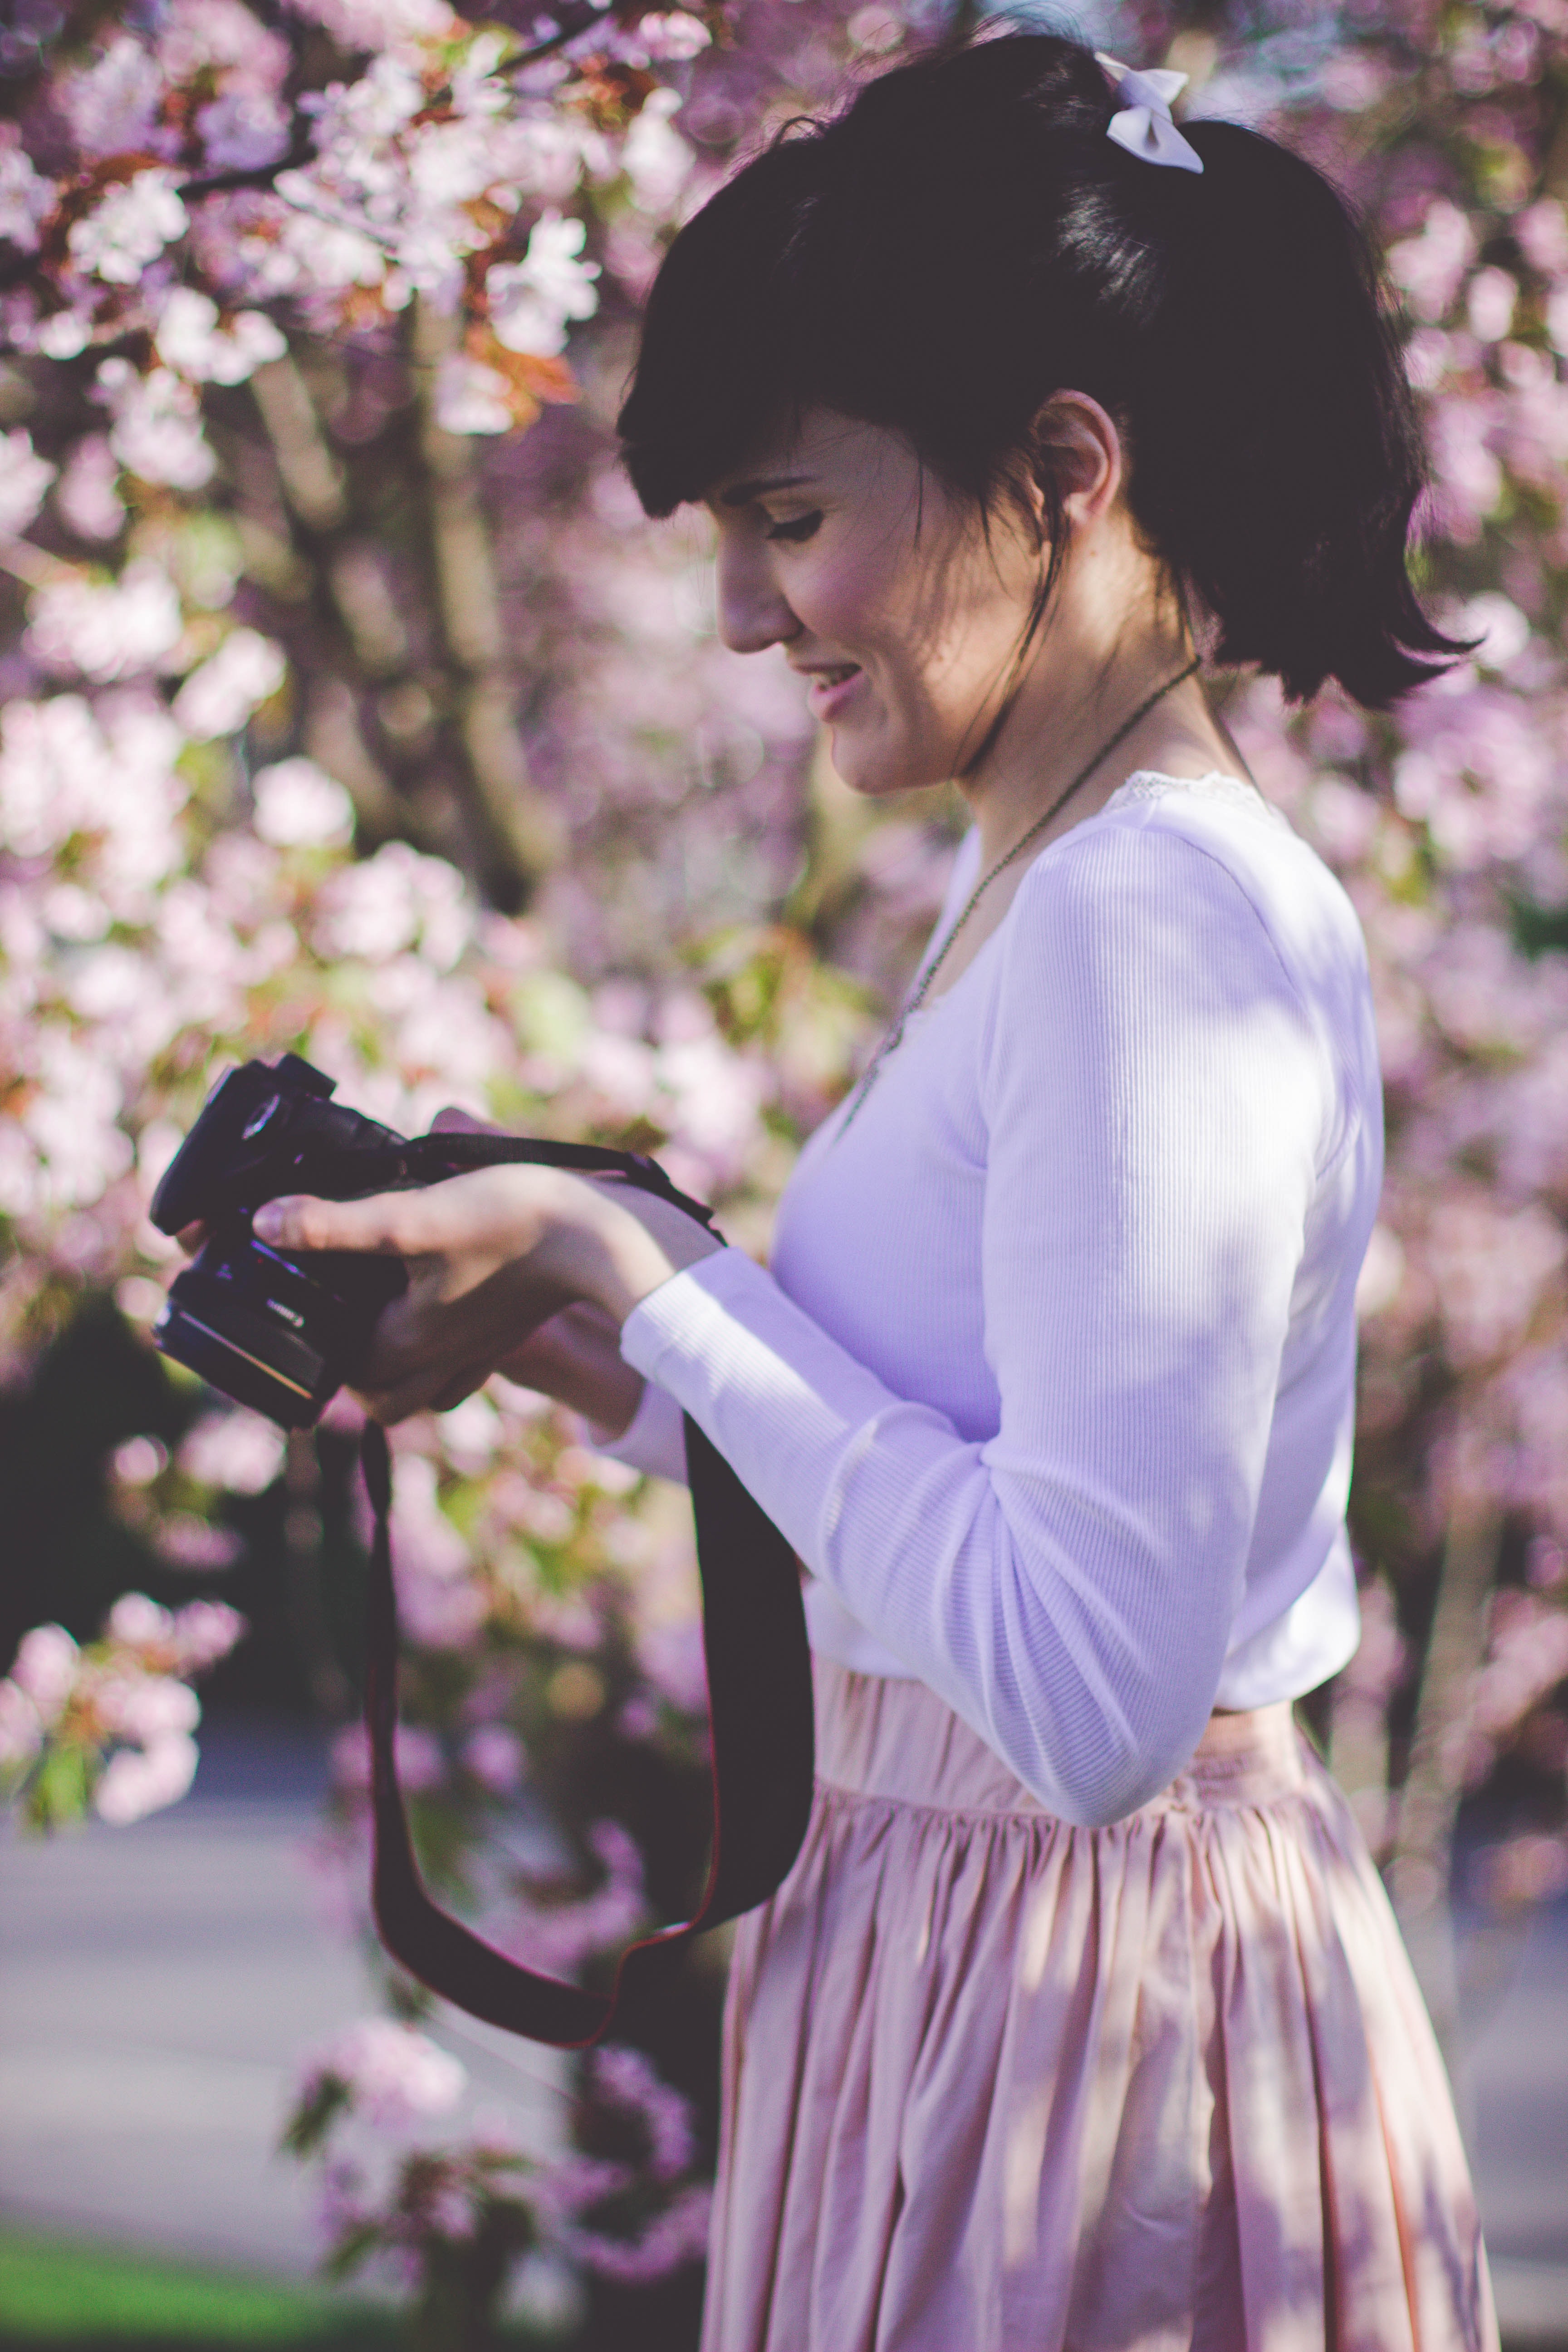 Woman in white long sleeve top and pink skirt holding black dslr camera photo